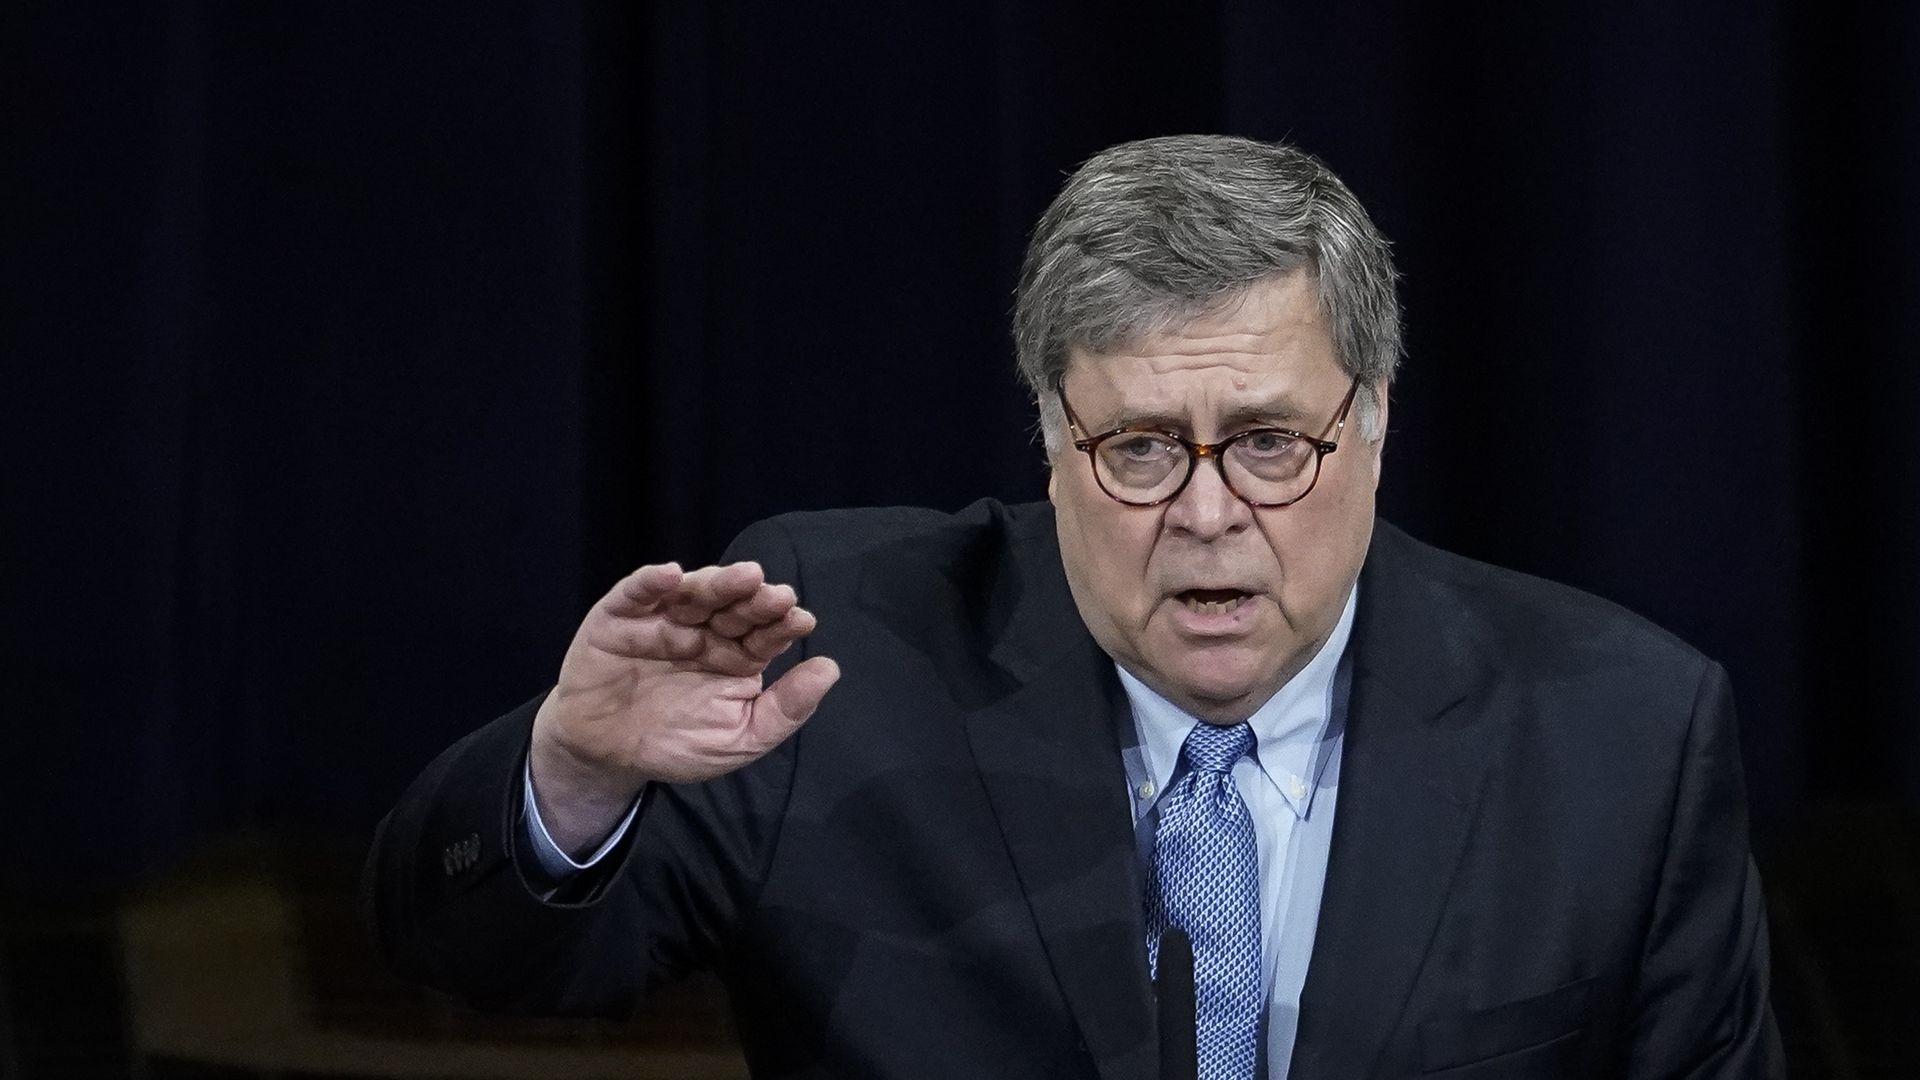  Attorney General William Barr speaks at the National Opioid Summit at the U.S. Department of Justice